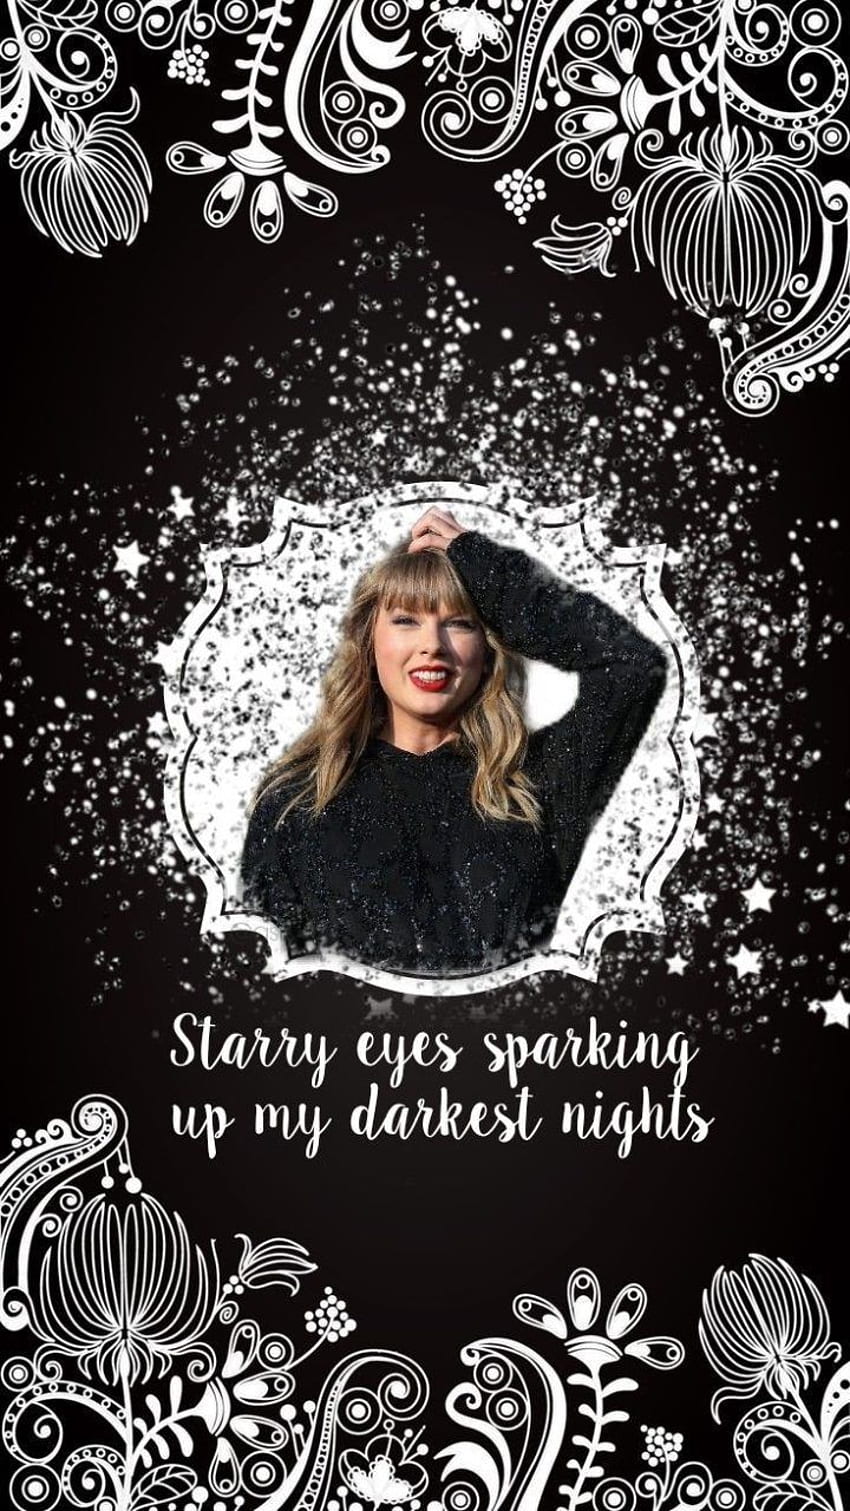 Taylor Swift wallpaper I made for my phone! - Taylor Swift